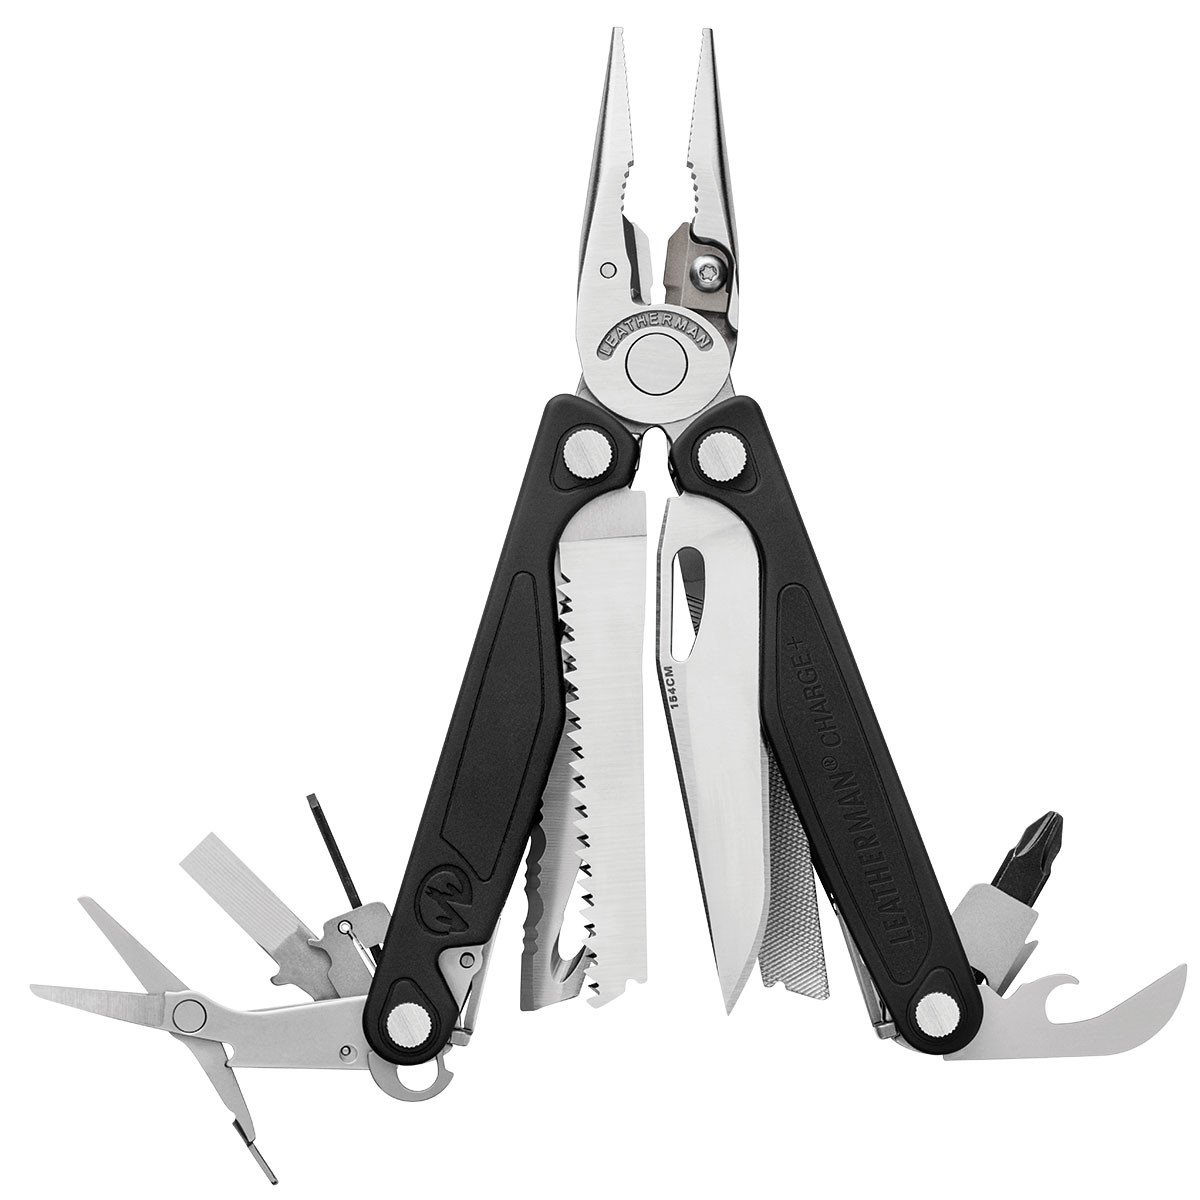 Leatherman Charge Plus G-10 Clam Multitool w Wire Stripper